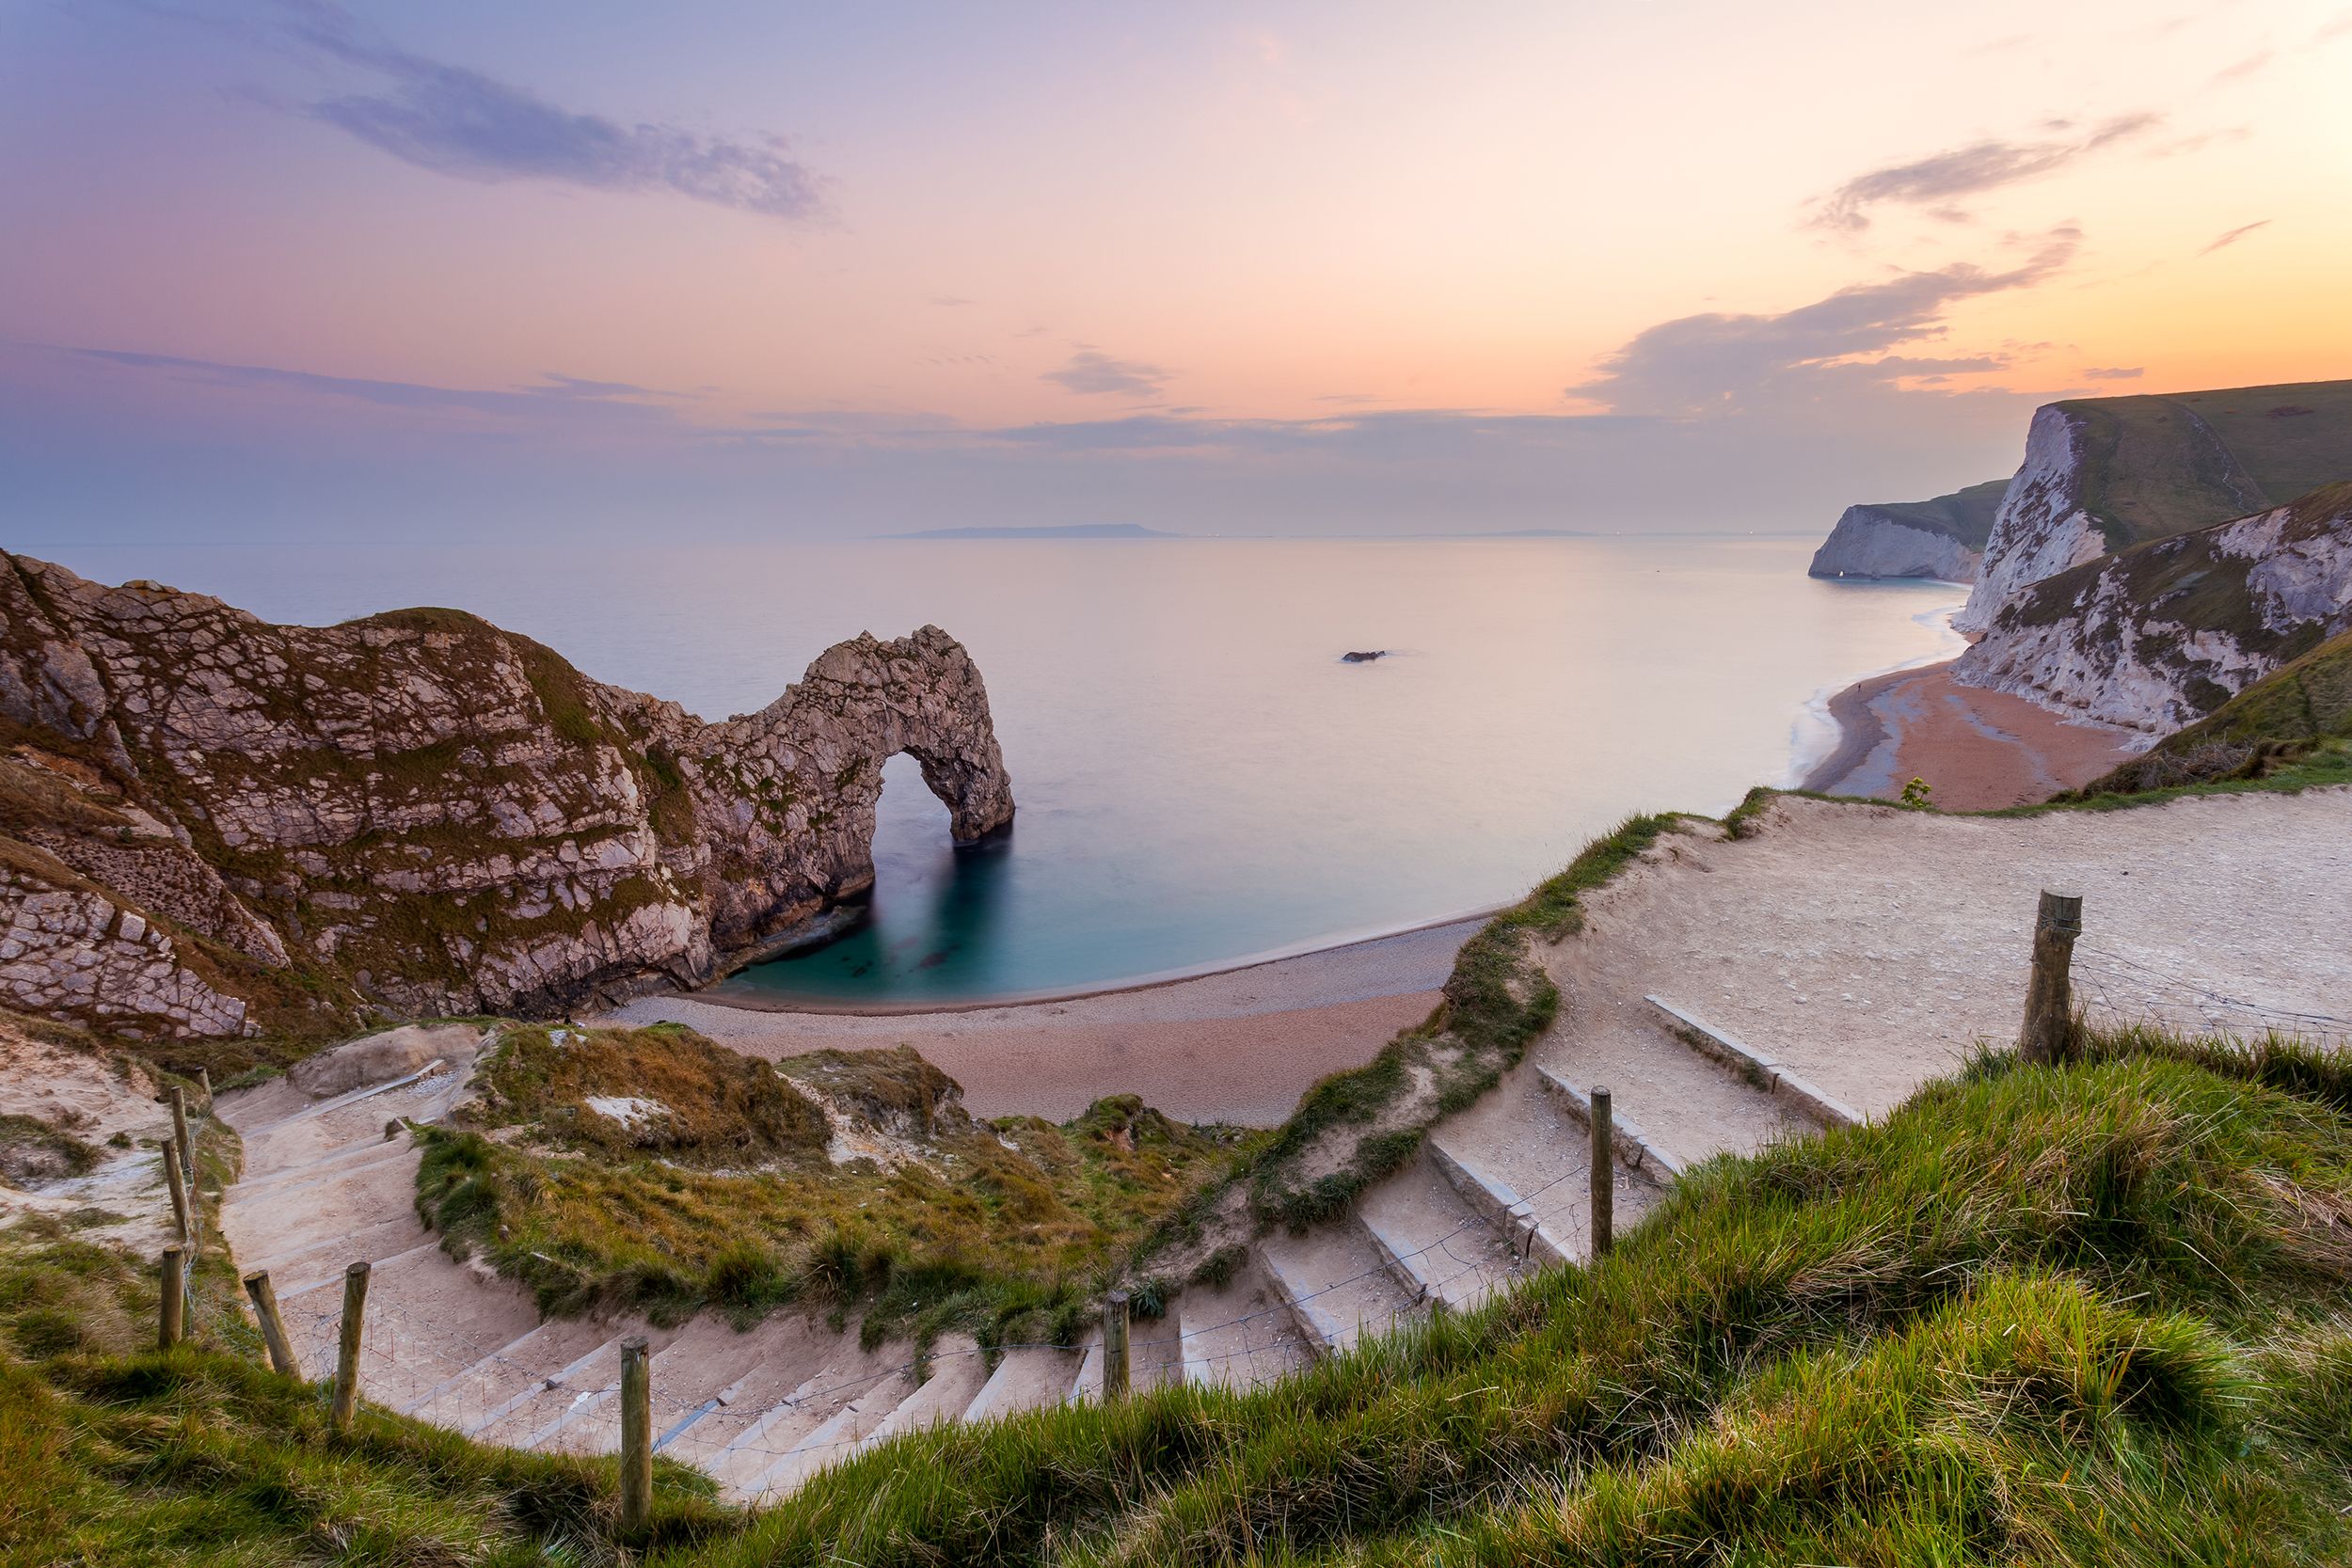 Jurassic Coast: How to visit what to see